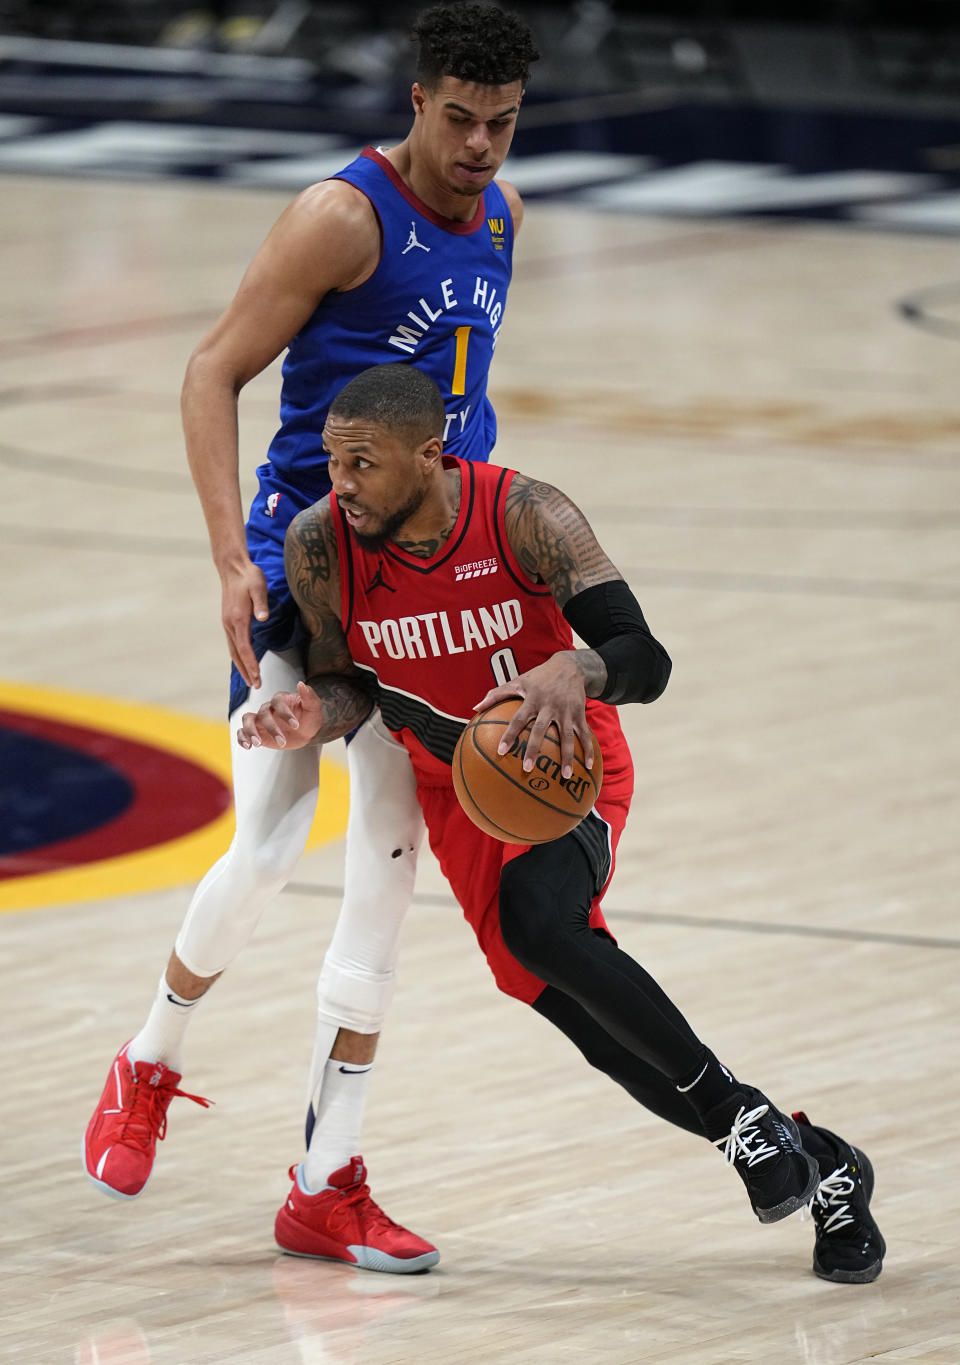 Portland Trail Blazers guard Damian Lillard (0) drives to the basket against Denver Nuggets forward Michael Porter Jr. (1) during the second half of Game 5 of a first-round NBA basketball playoff series Tuesday, June 1, 2021, in Denver. (AP Photo/Jack Dempsey)